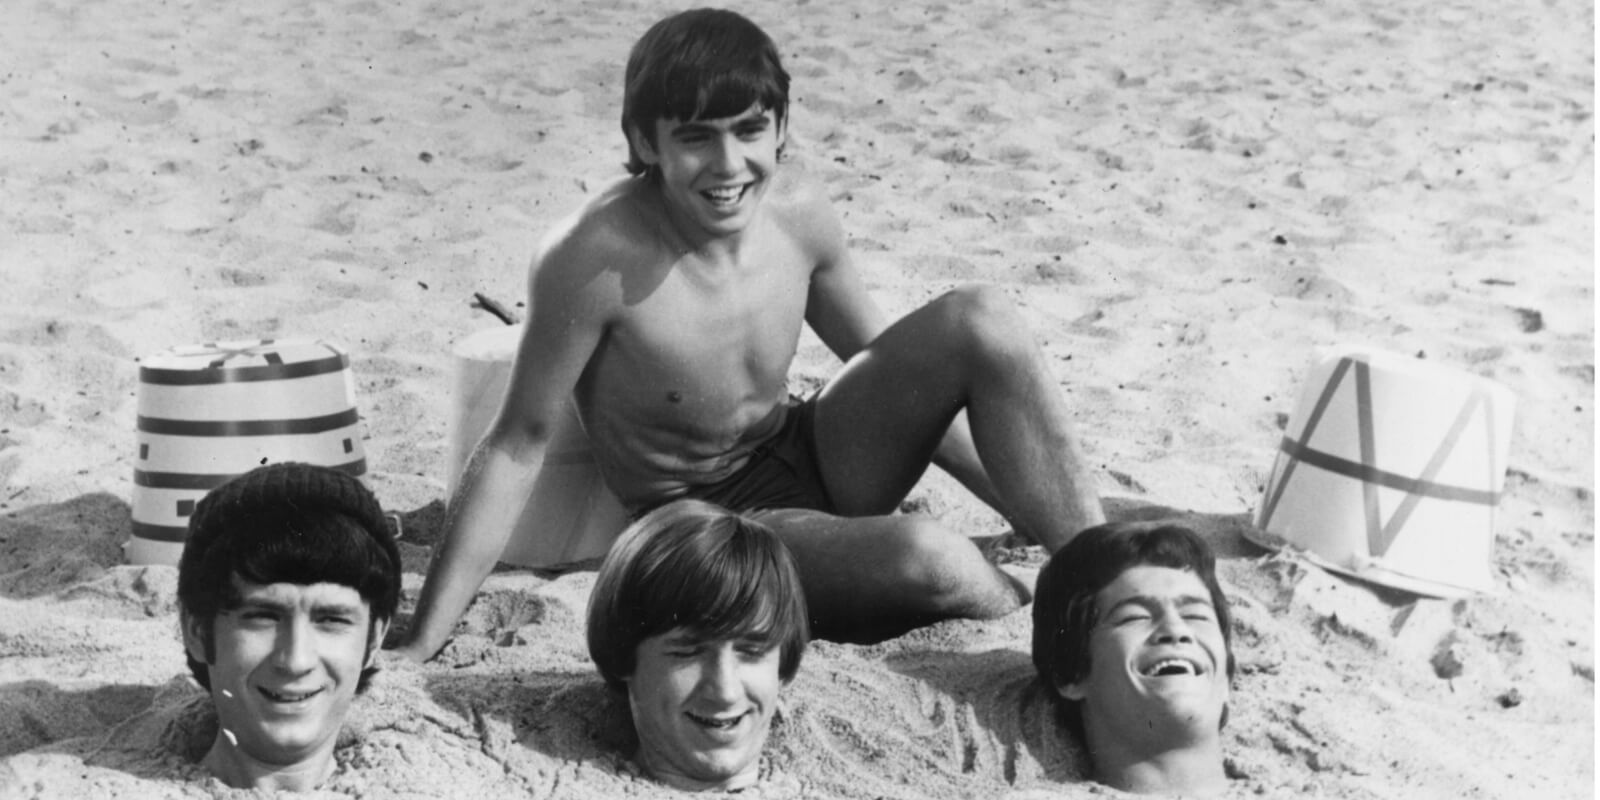 Davy Jones is seated on the sand in front of fellow 'The Monkees' co-stars Mike Nesmith, Peter Tork, and Micky Dolenz in 'Royal Flush.'